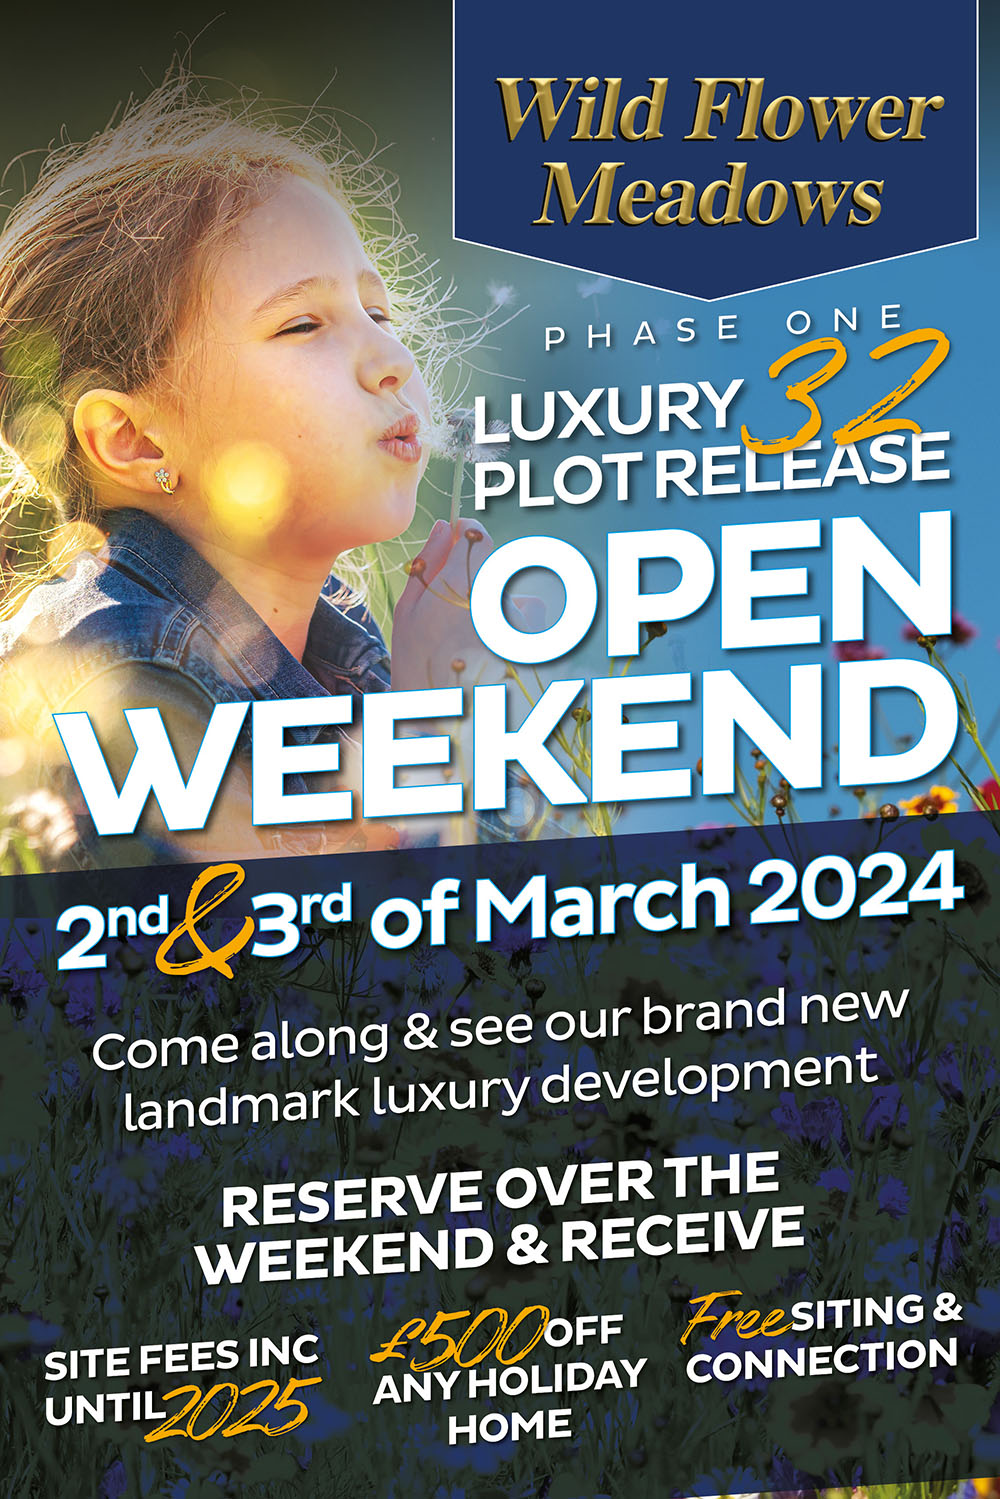 Wild Flower Meadows. Phase one - 32 luxury plot release. Open weekend 2nd and 3rd of march 2024.